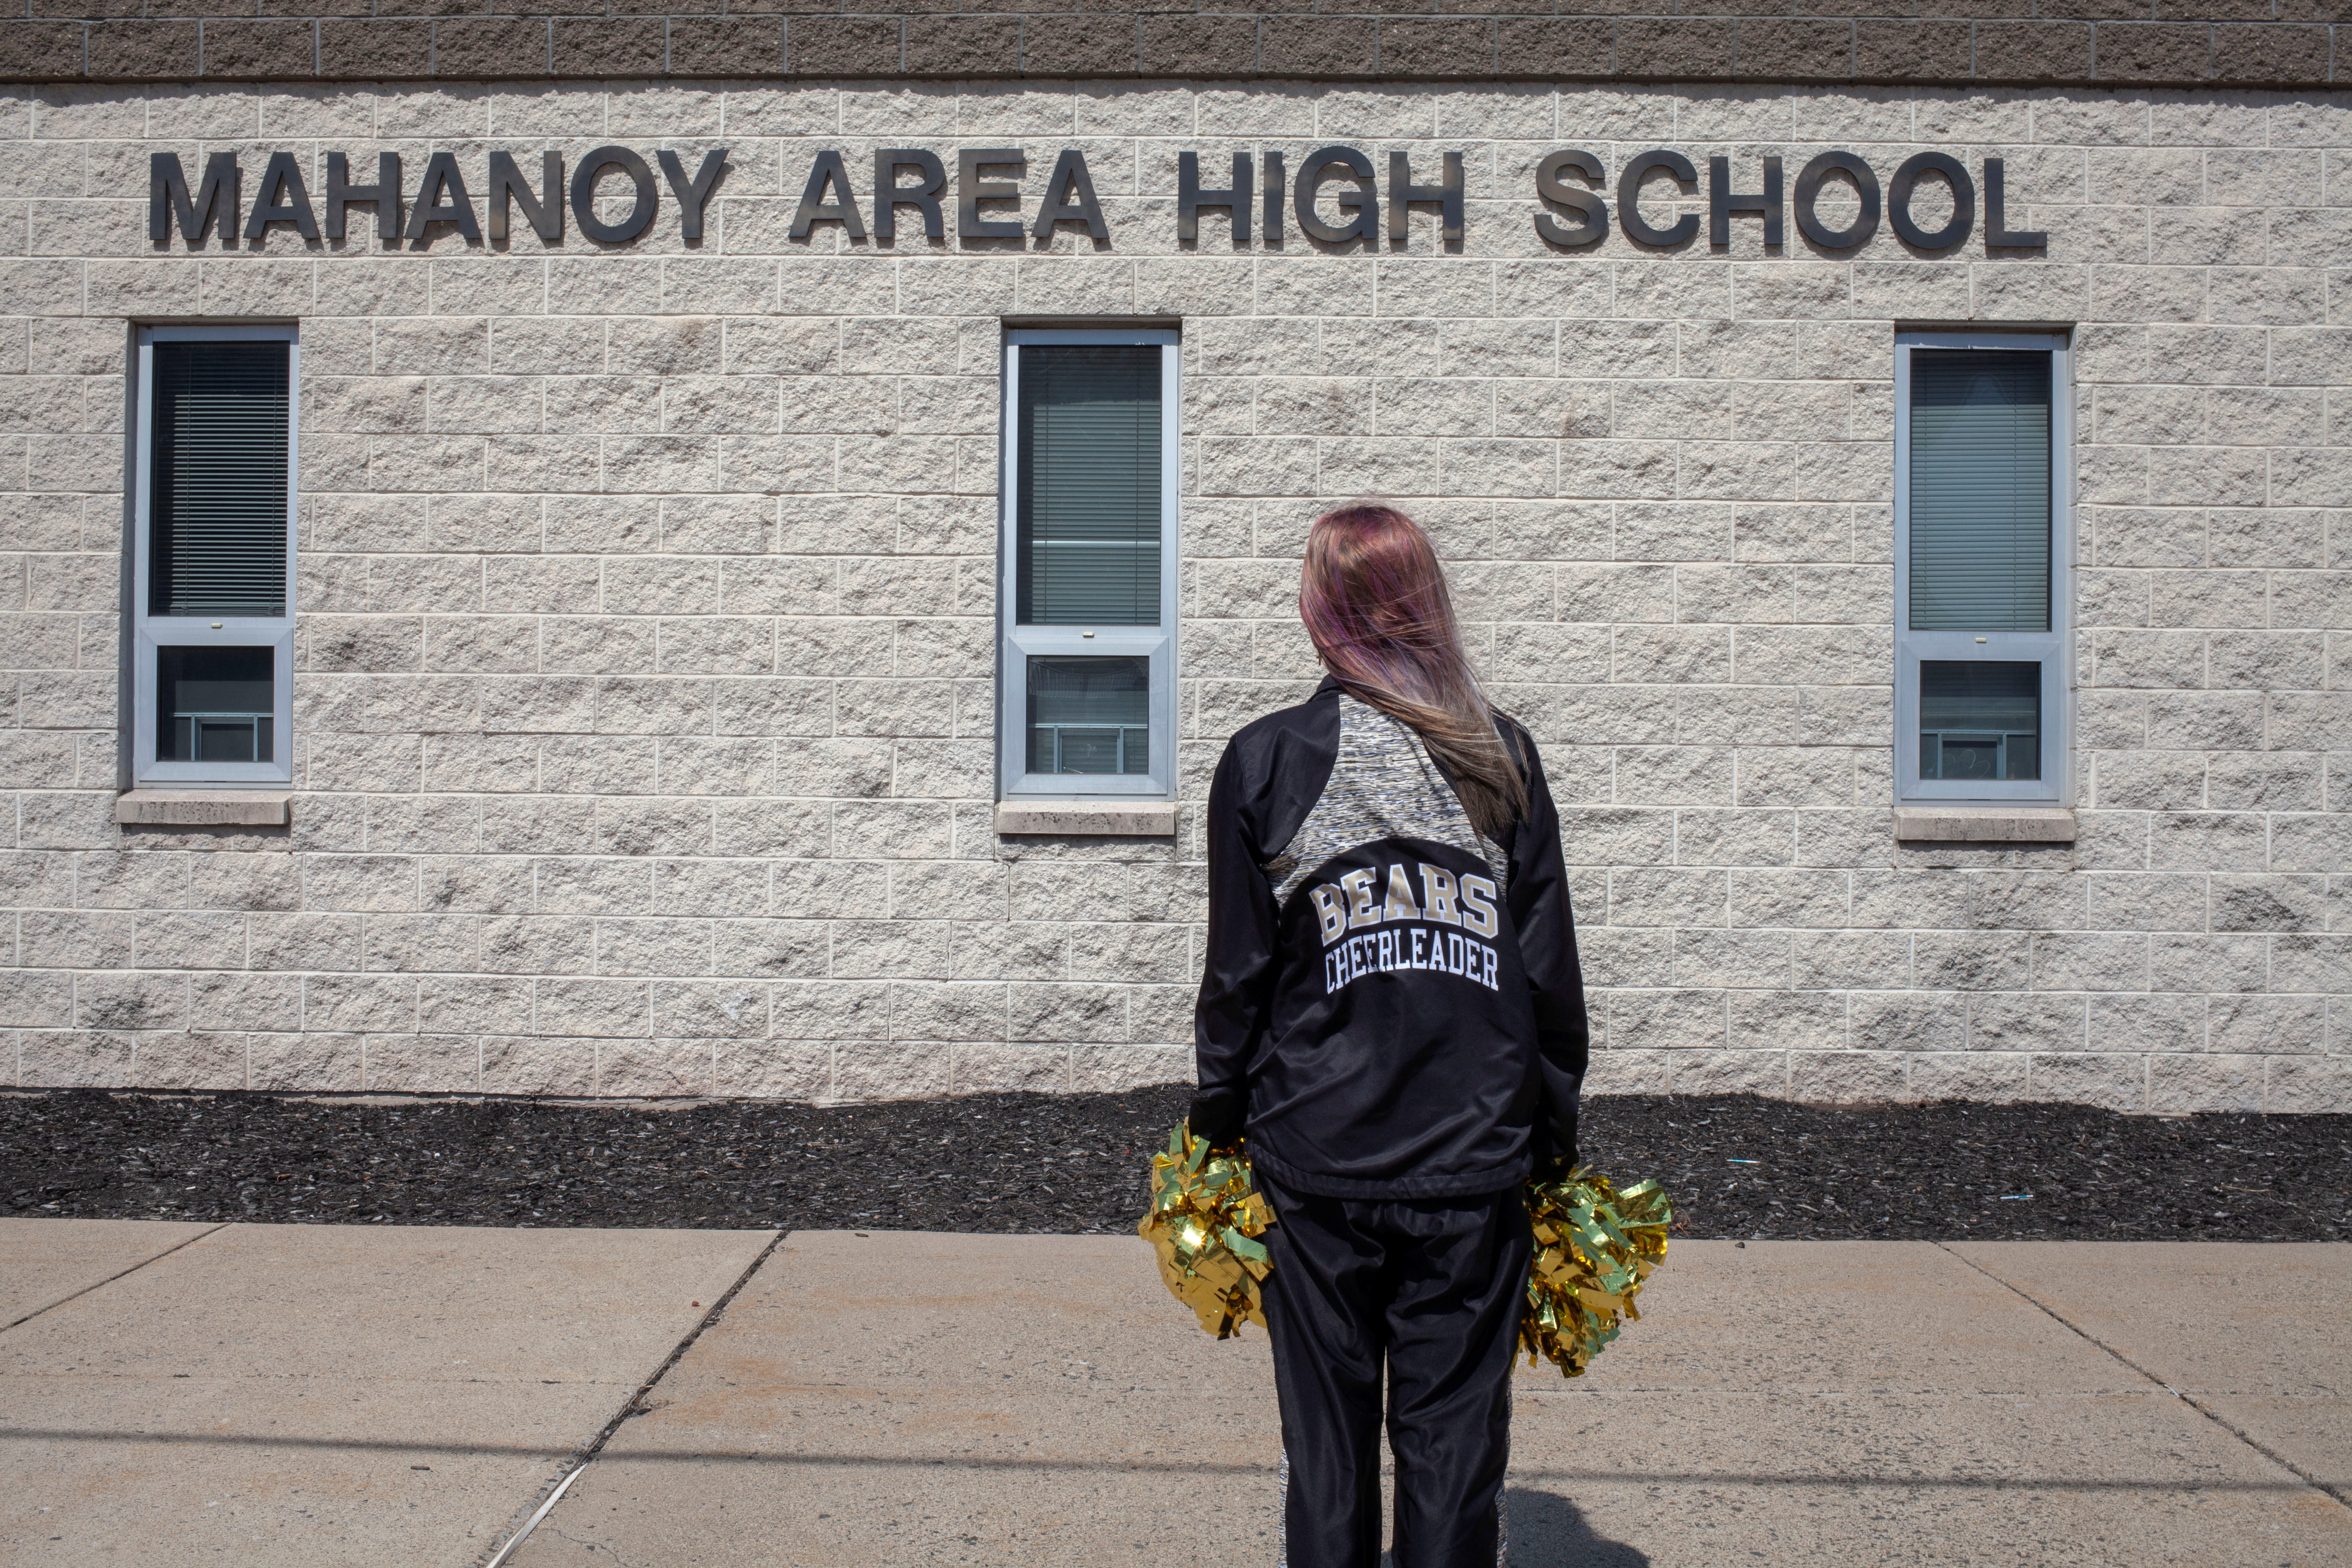 Levy, a former cheerleader at Mahanoy Area High School, poses in an undated photograph